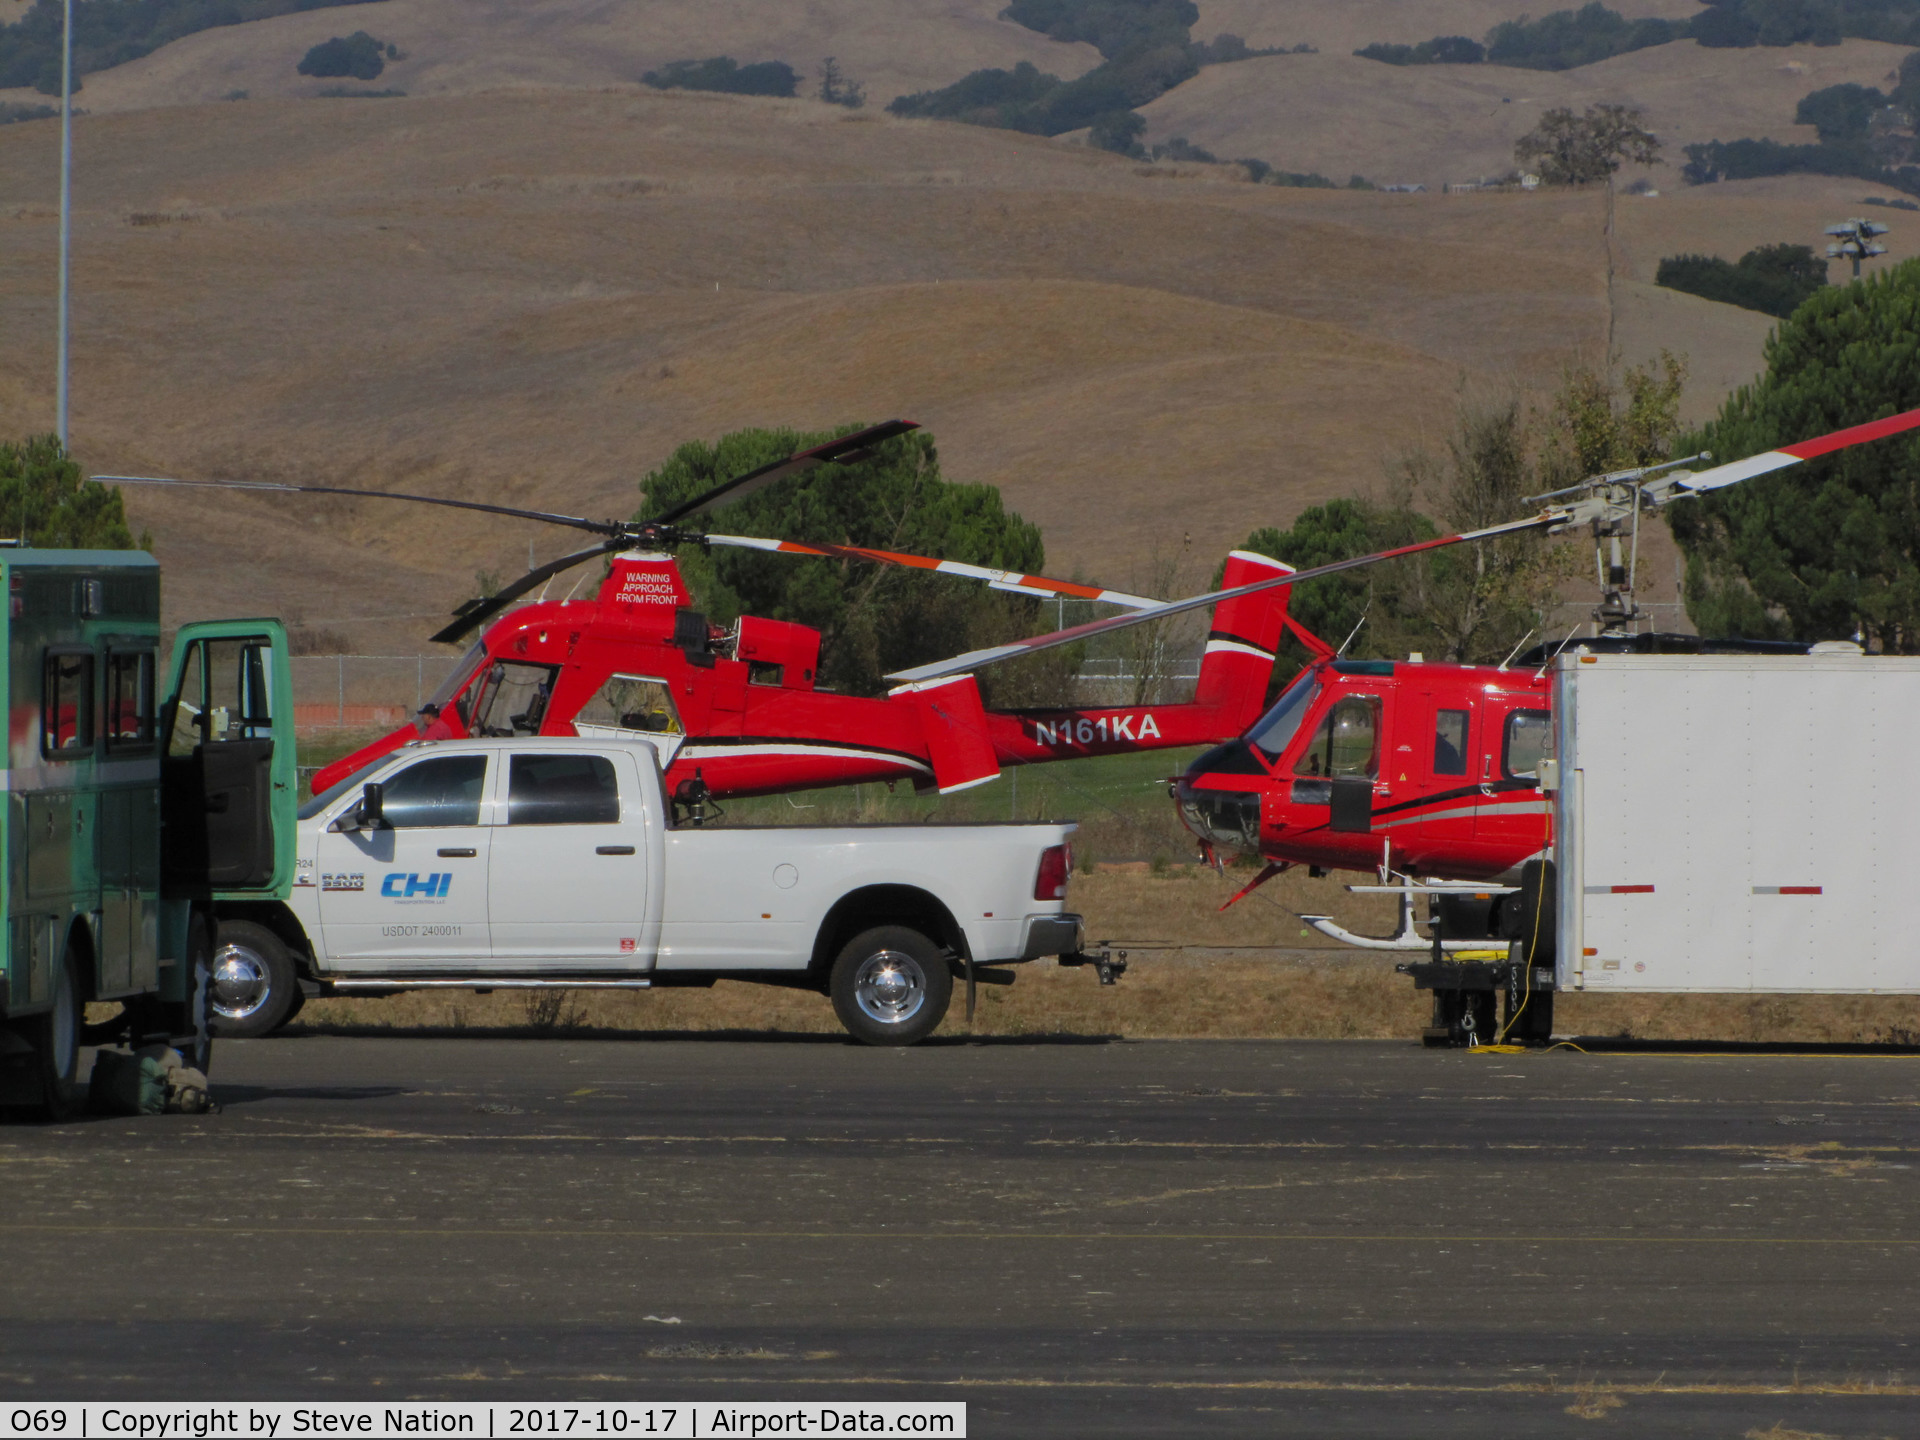 Petaluma Municipal Airport (O69) - Petaluma Municipal Airport, CA was closed to fixed wing operations for 10 days in October 2017 to support CALFIRE contracted helicopters making drops on the devastating fires in Northern California ... kudos to airport manager Bob Patterson! 